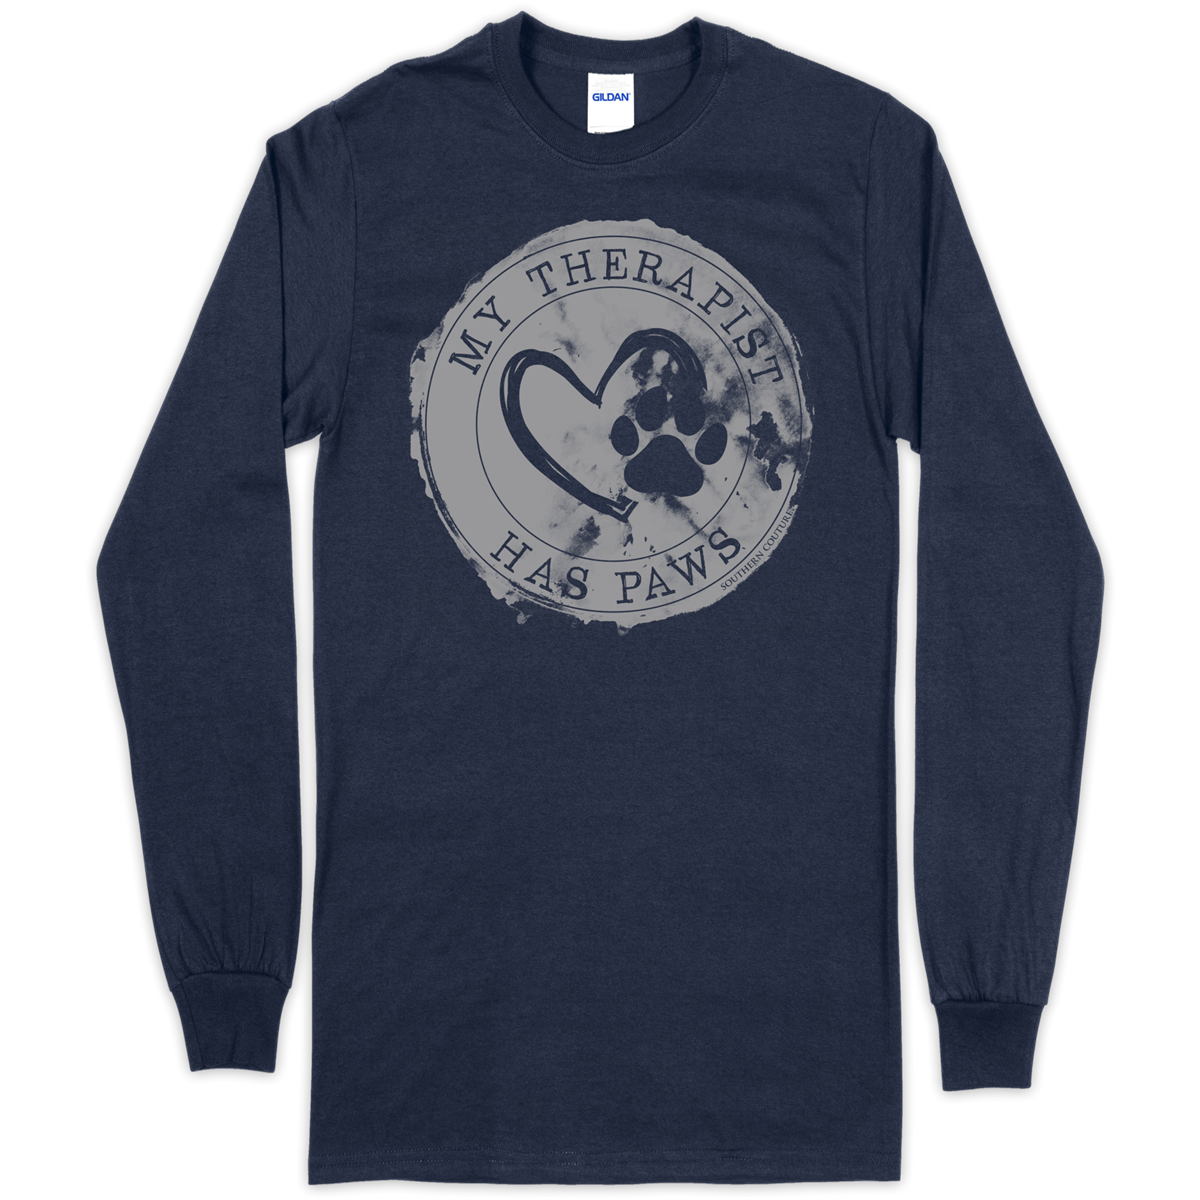 Southern Couture Therapist Has Paws Soft Long Sleeve T-Shirt